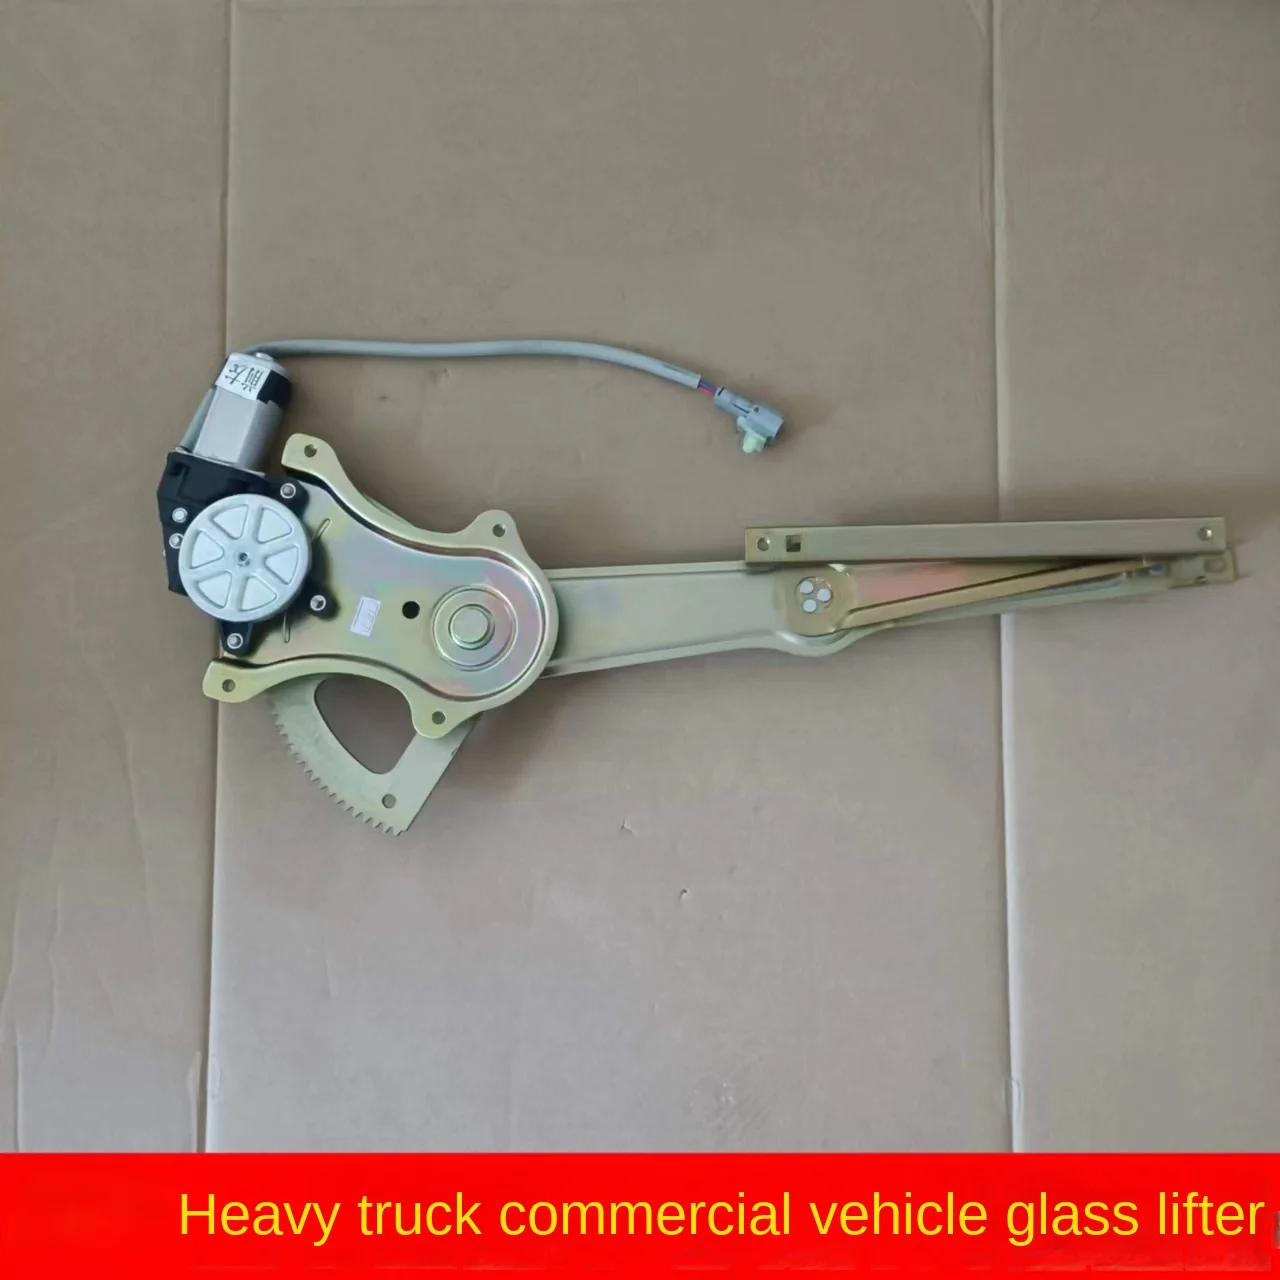 

Glass Lifter Assembly Commercial Vehicle for Yingjie Zhu Hong Junliang Wang Dao Super Bright Version Accessories